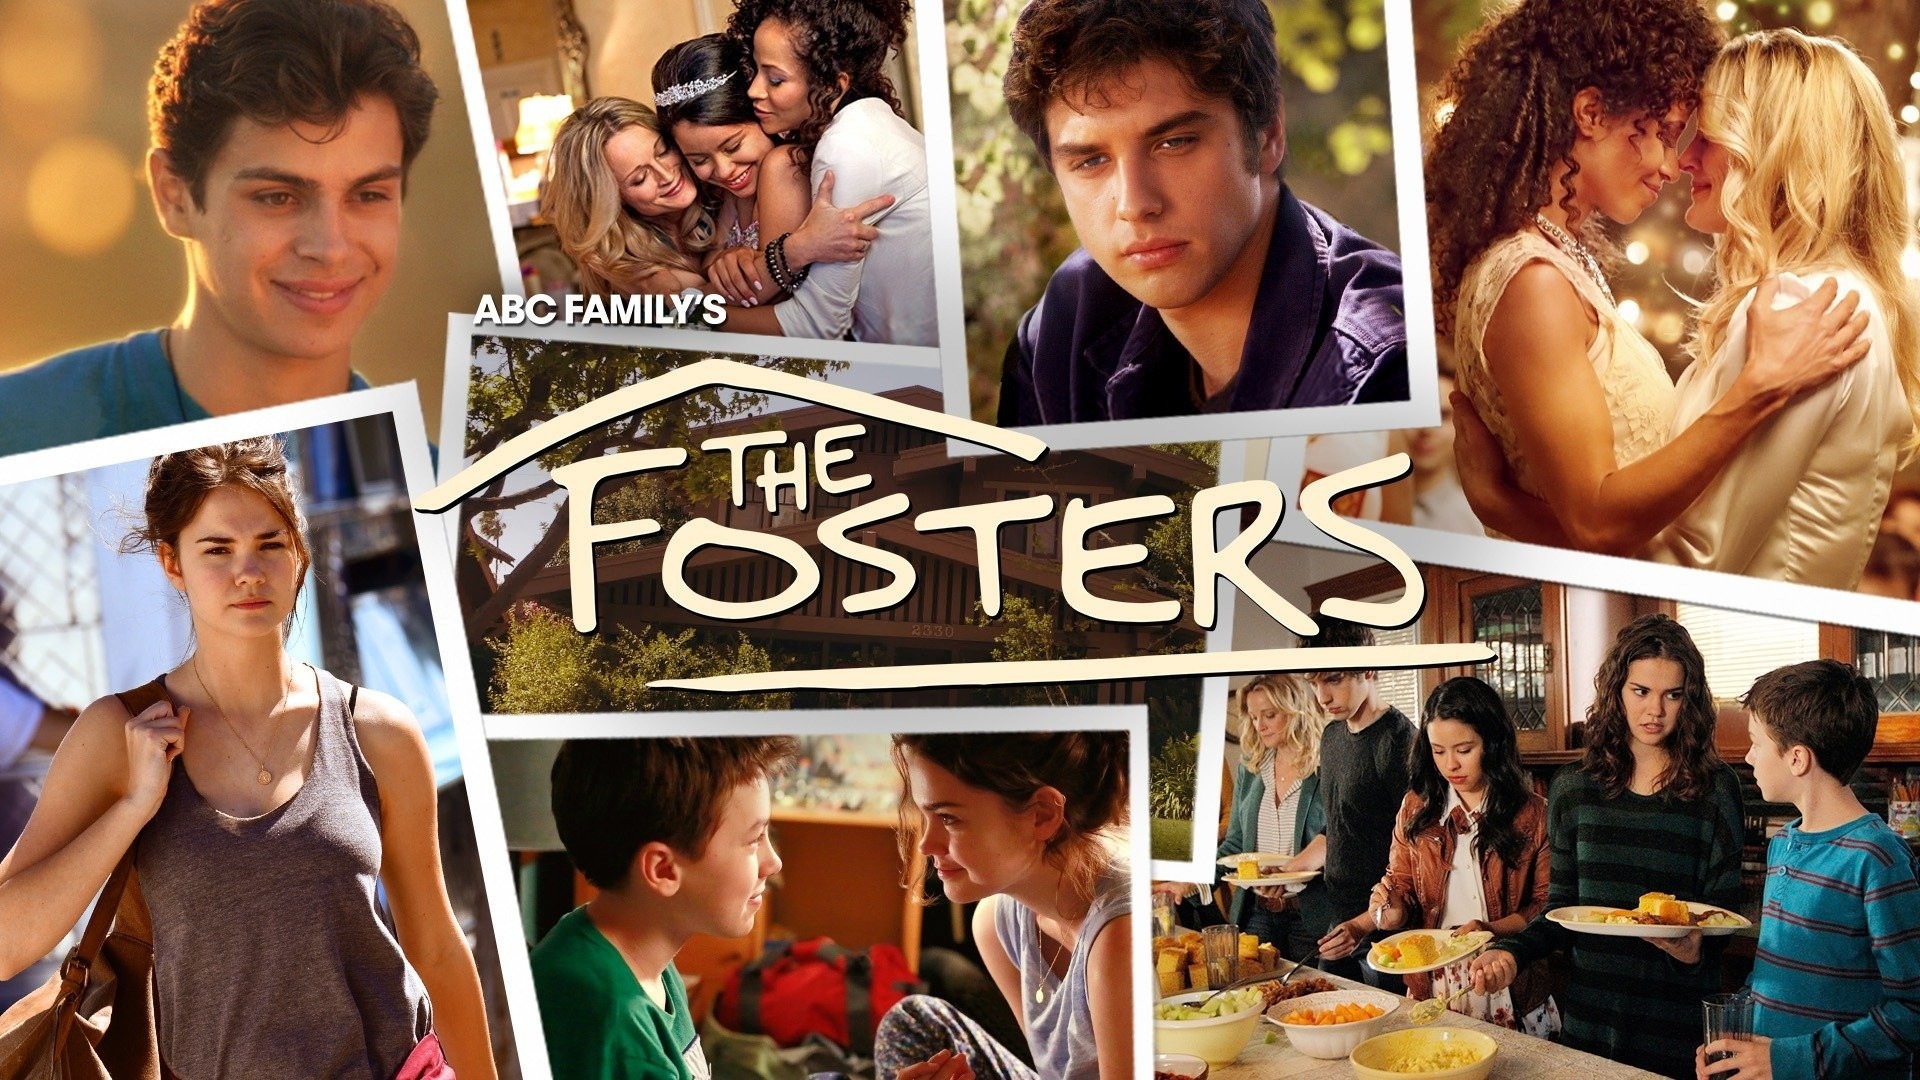 The Fosters Season 4 Premiere: Maia Mitchell on Callie's Latest Run in with  the Law - TV Guide